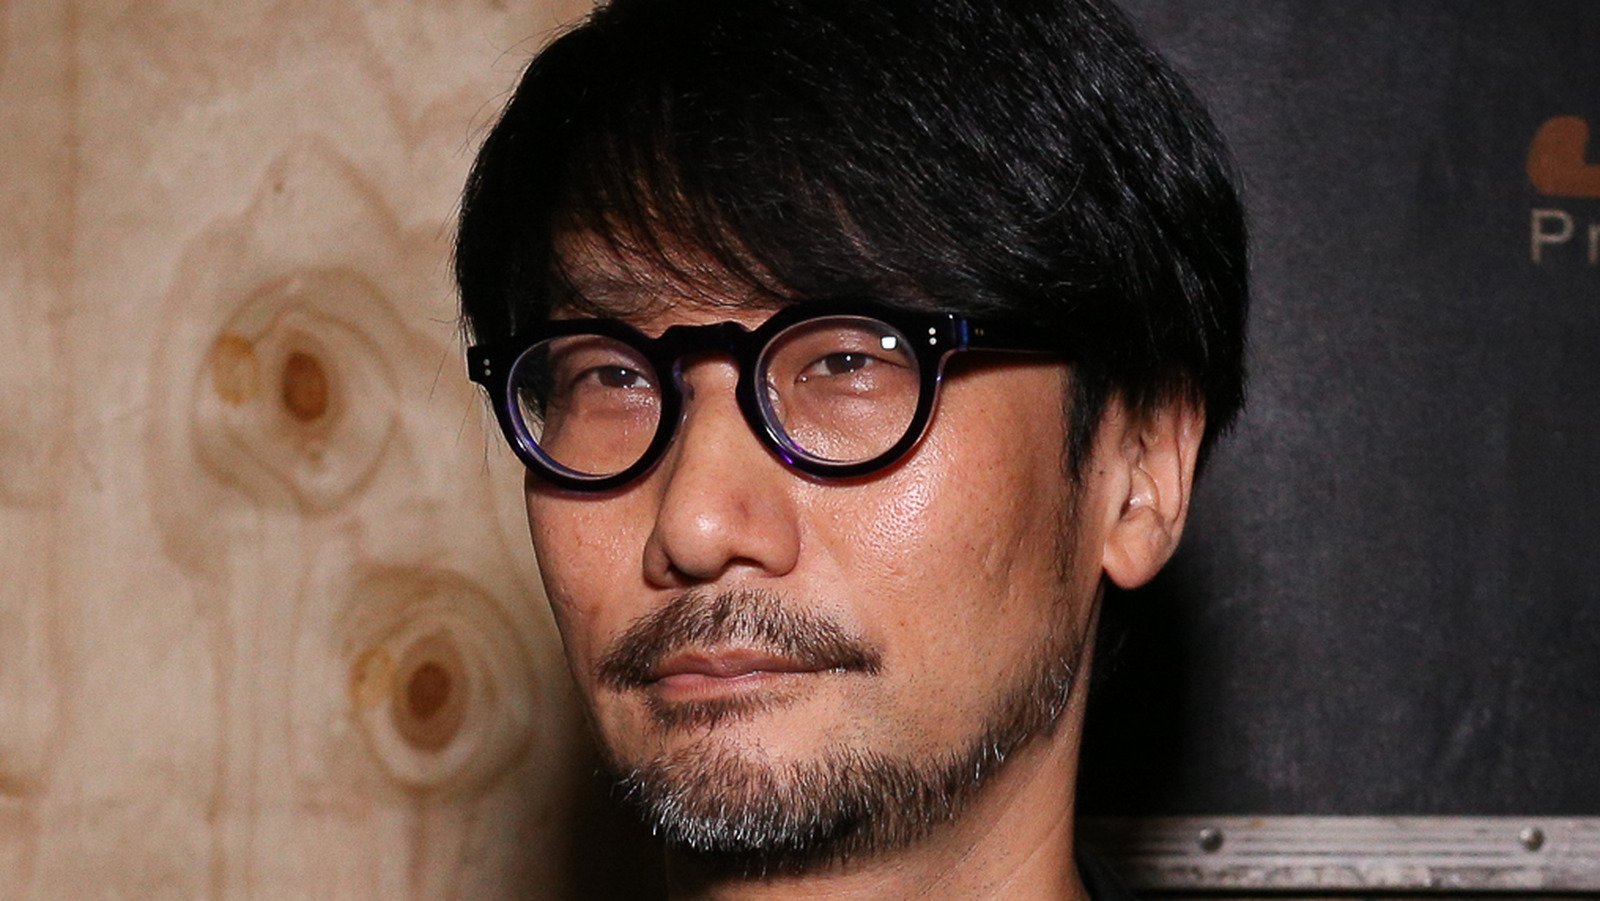 We May Already Know Hideo Kojima's Mystery Project